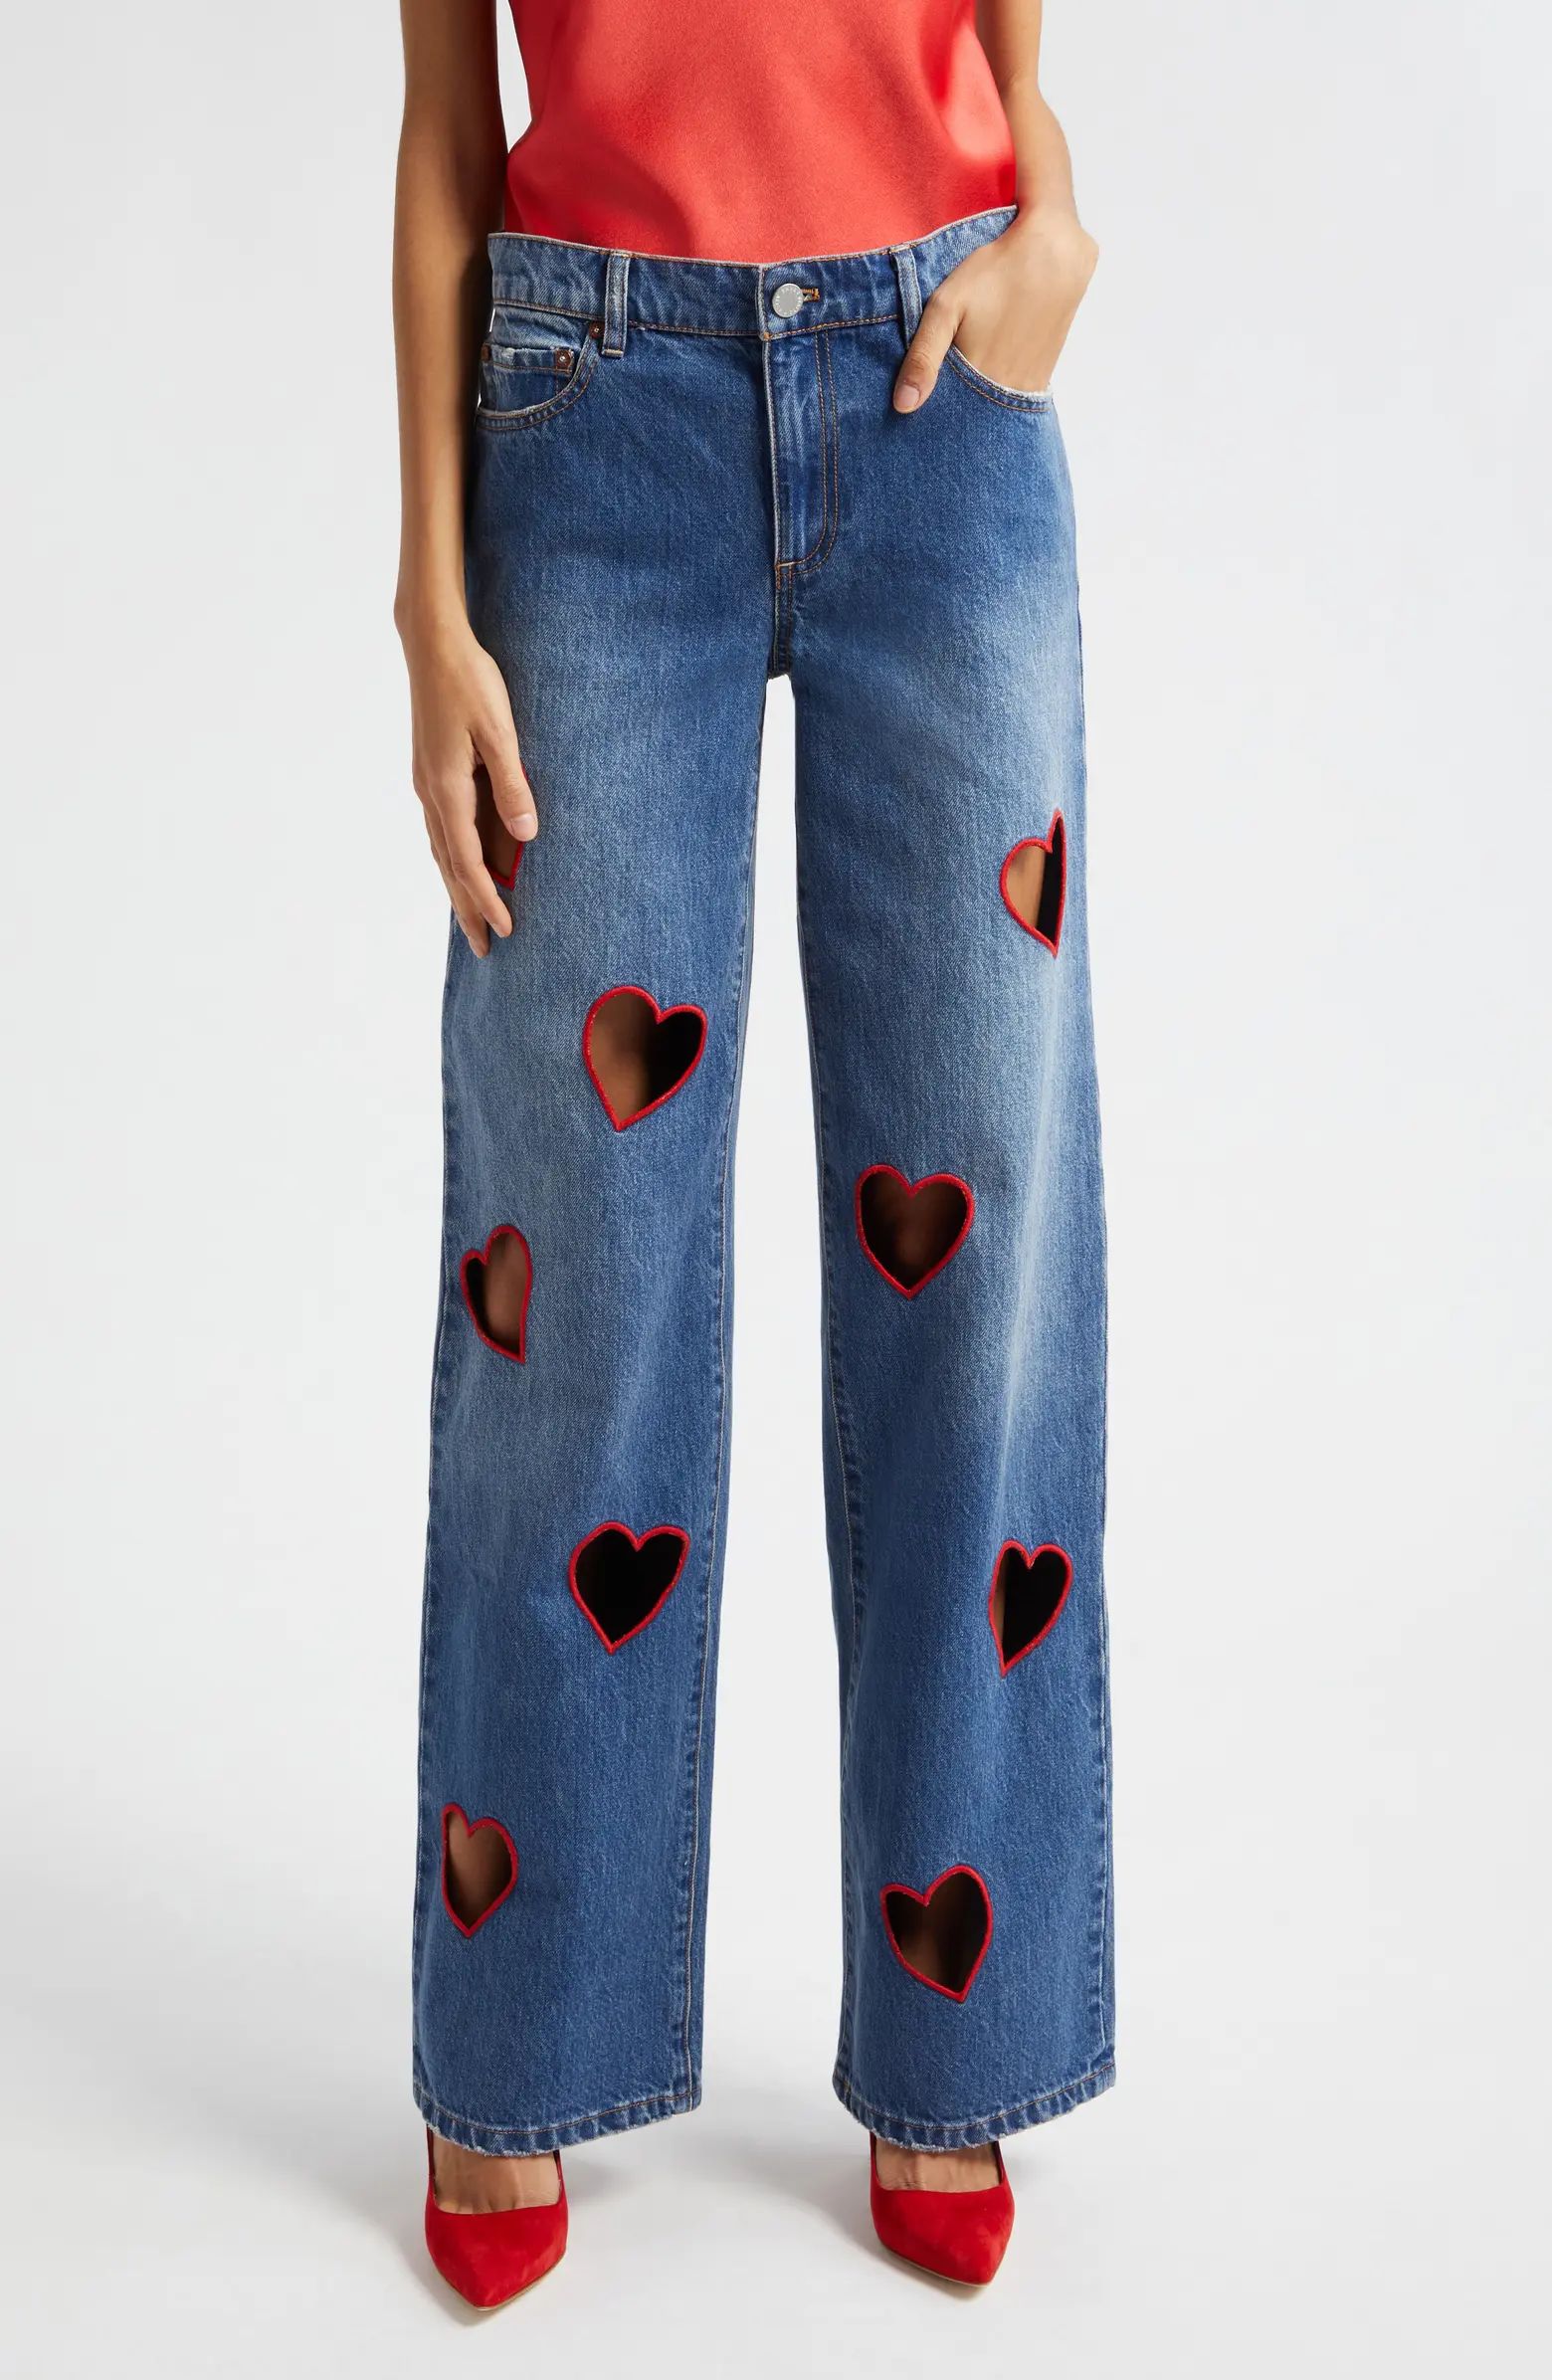 Alice + Olivia Karrie Embroidered Heart Cutout Nonstretch Jeans | Nordstrom | Nordstrom